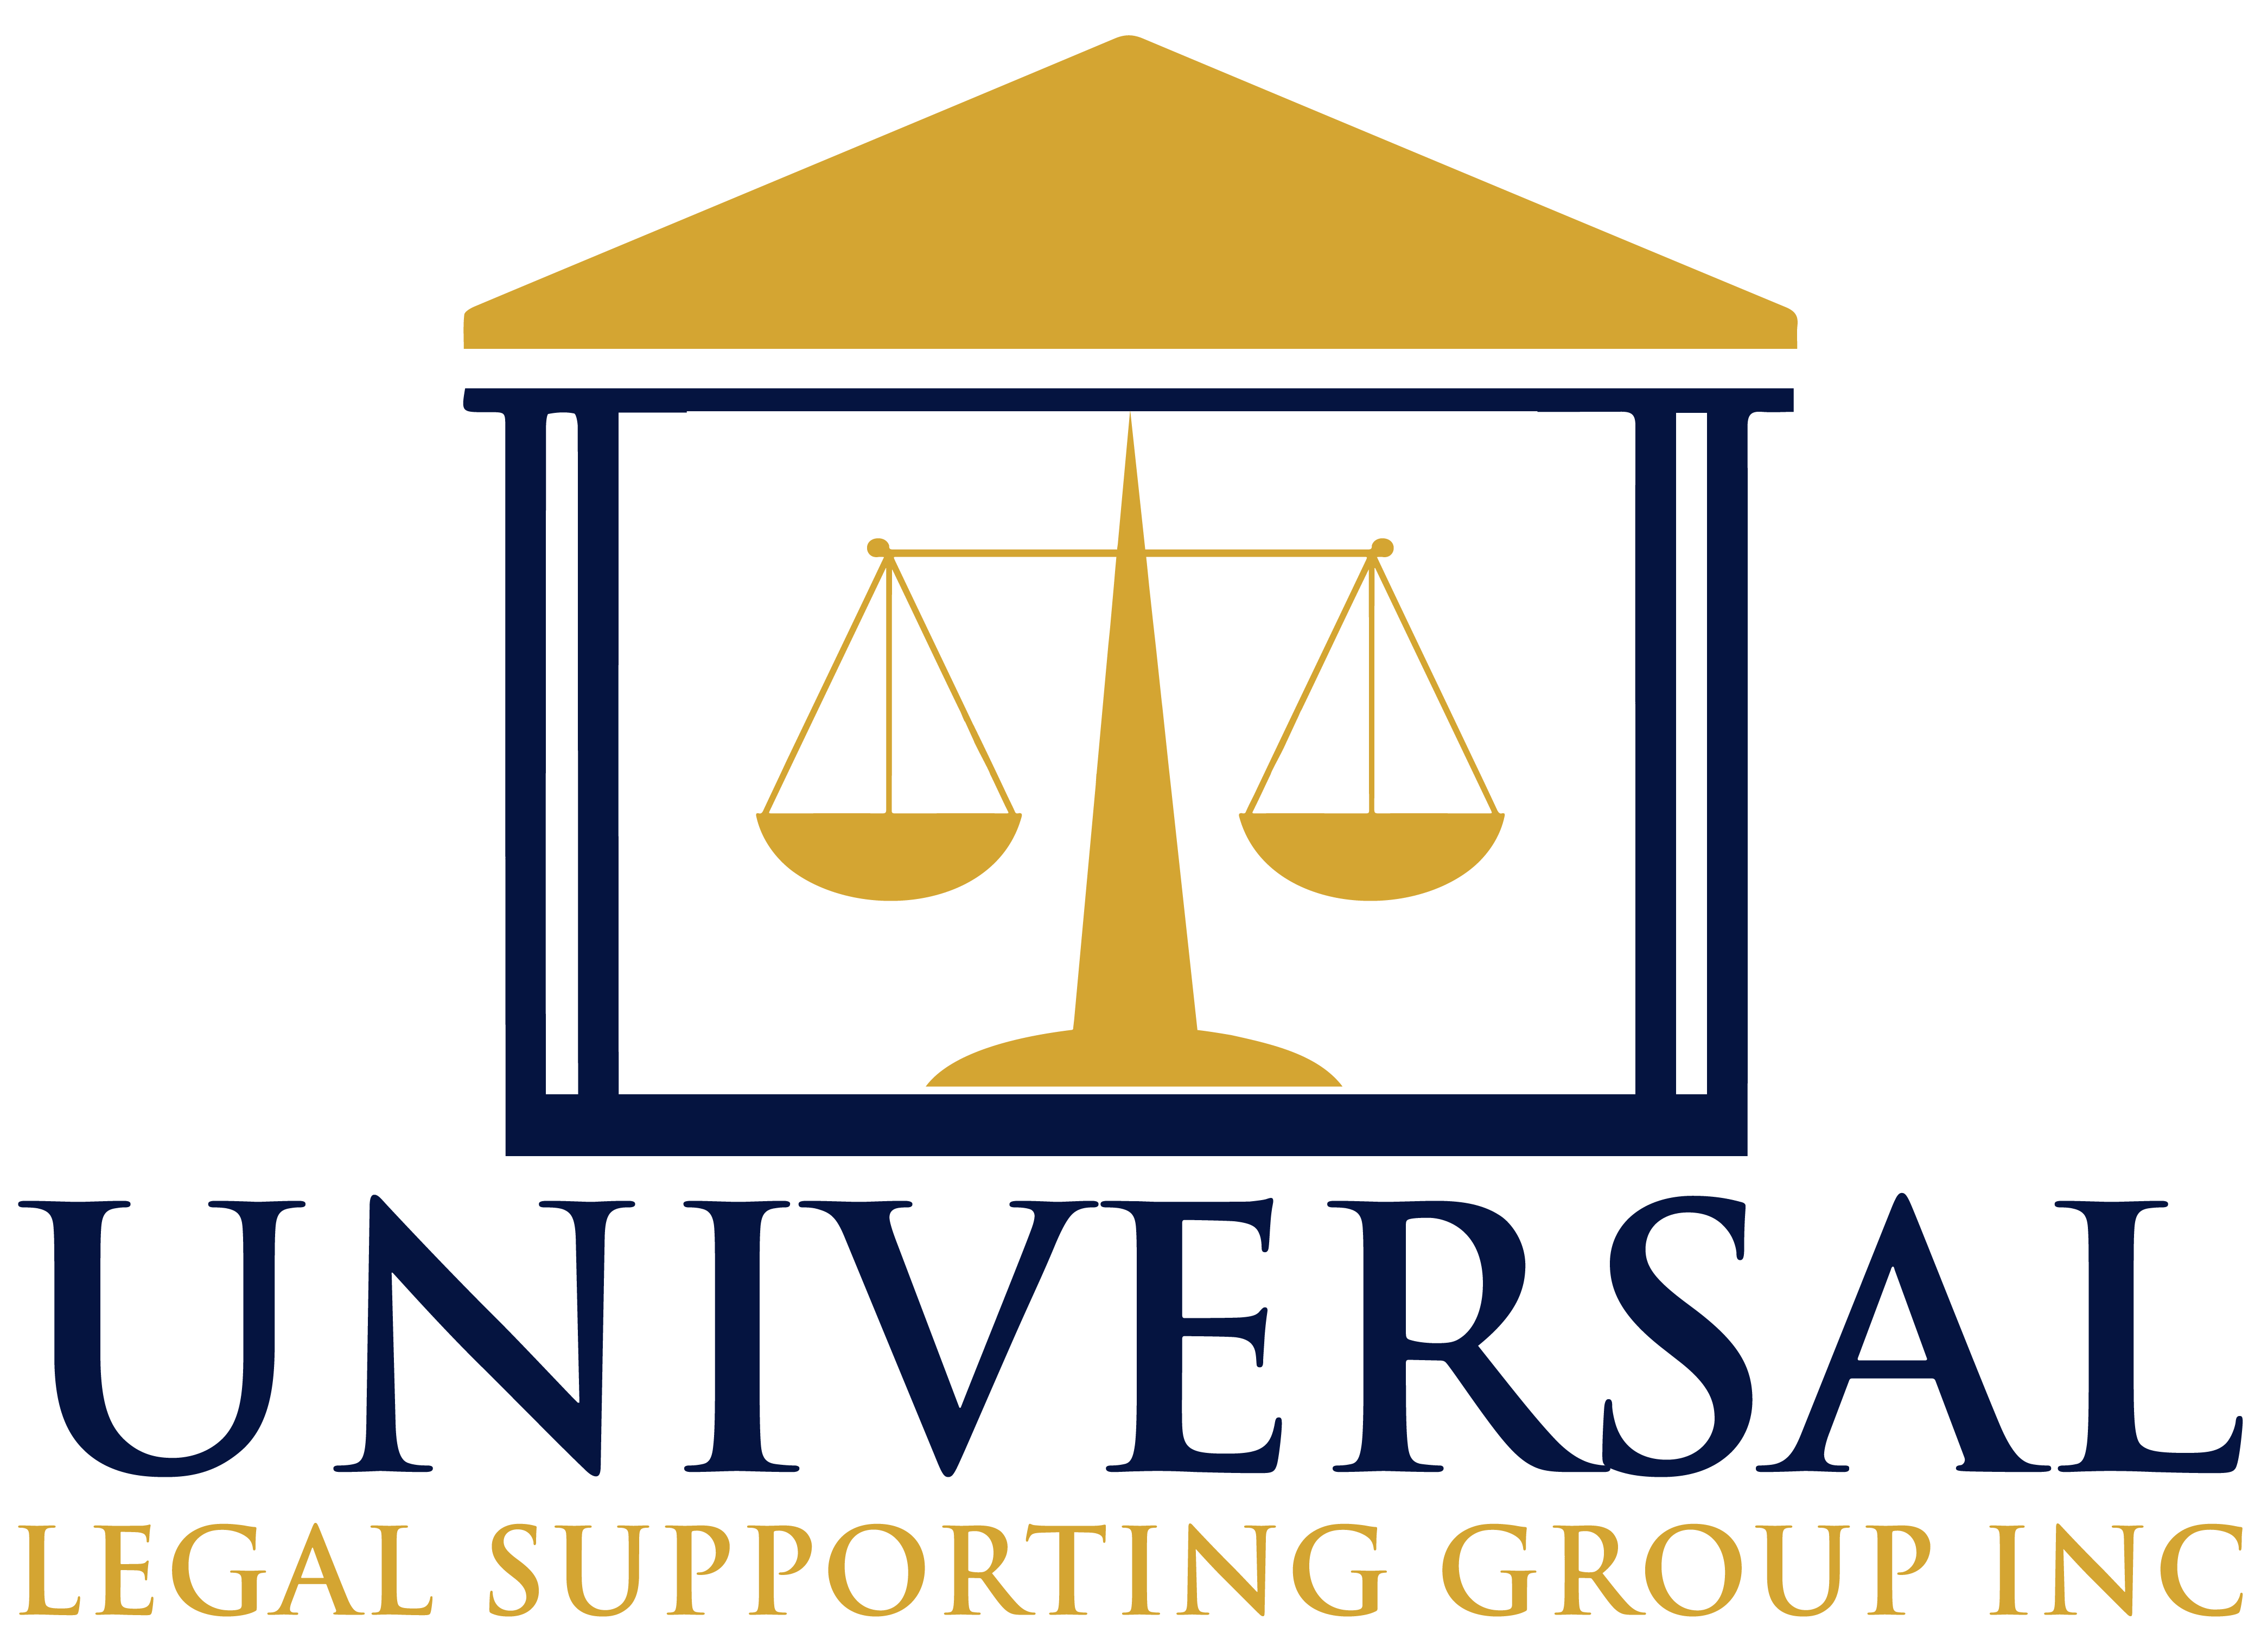 UNIVERSAL LEGAL SUPPORTING